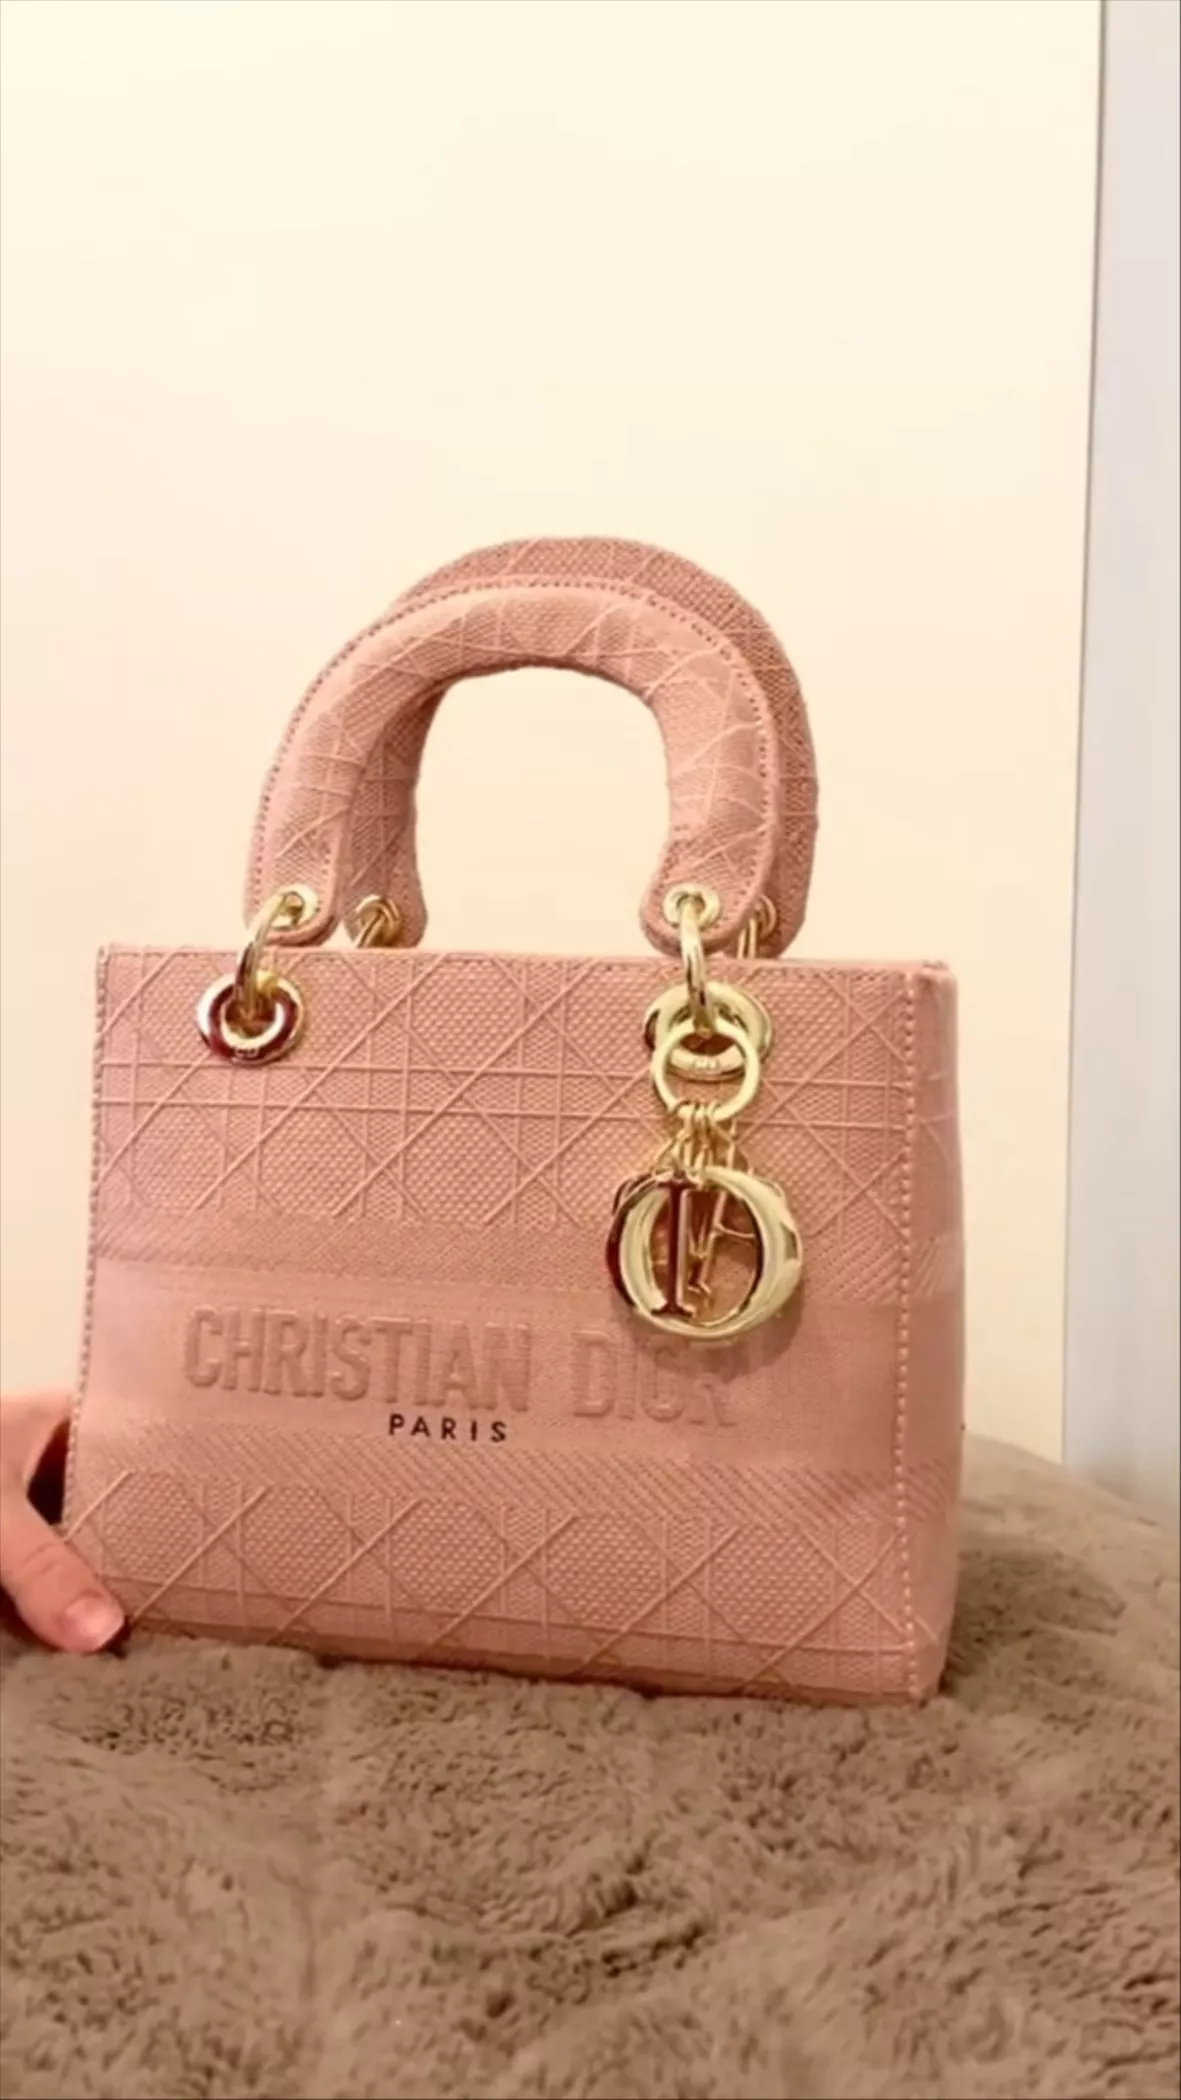 Large Dior Book Tote - $95 - Fashion Bags Store 8 : r/DHgate